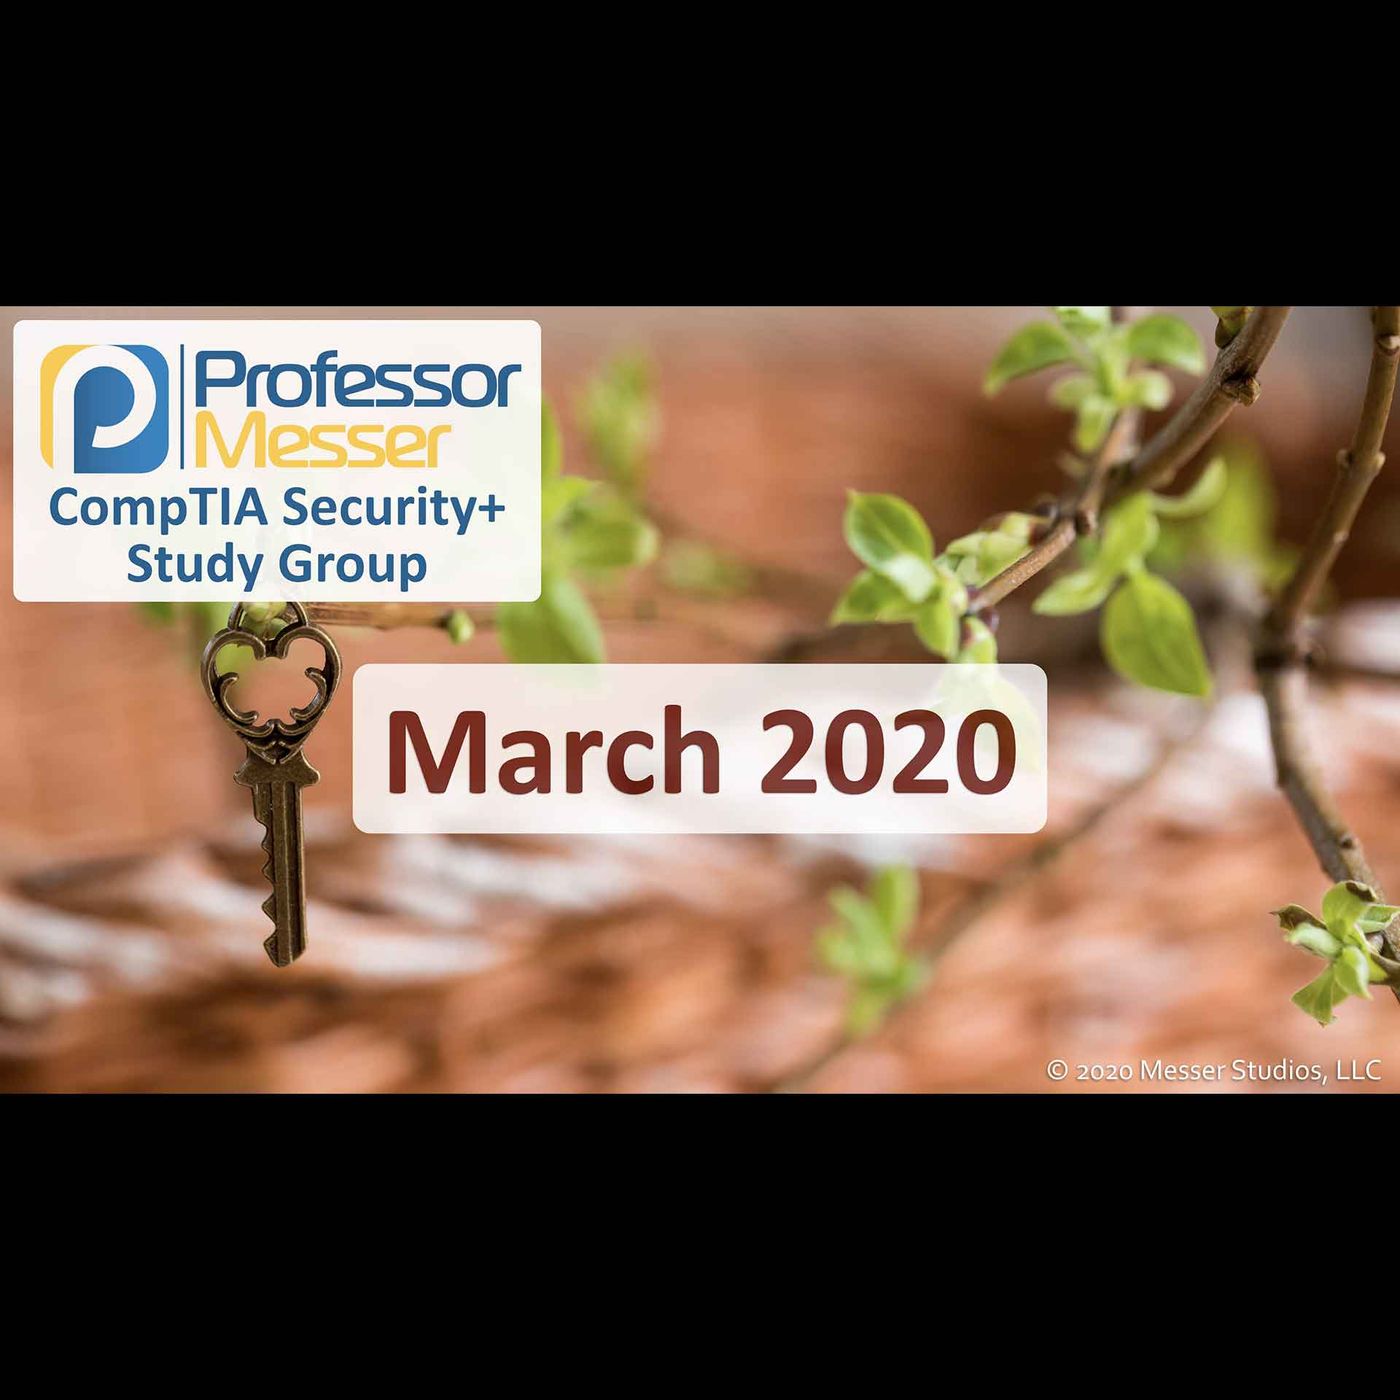 Professor Messer's Security+ Study Group After Show - March 2020